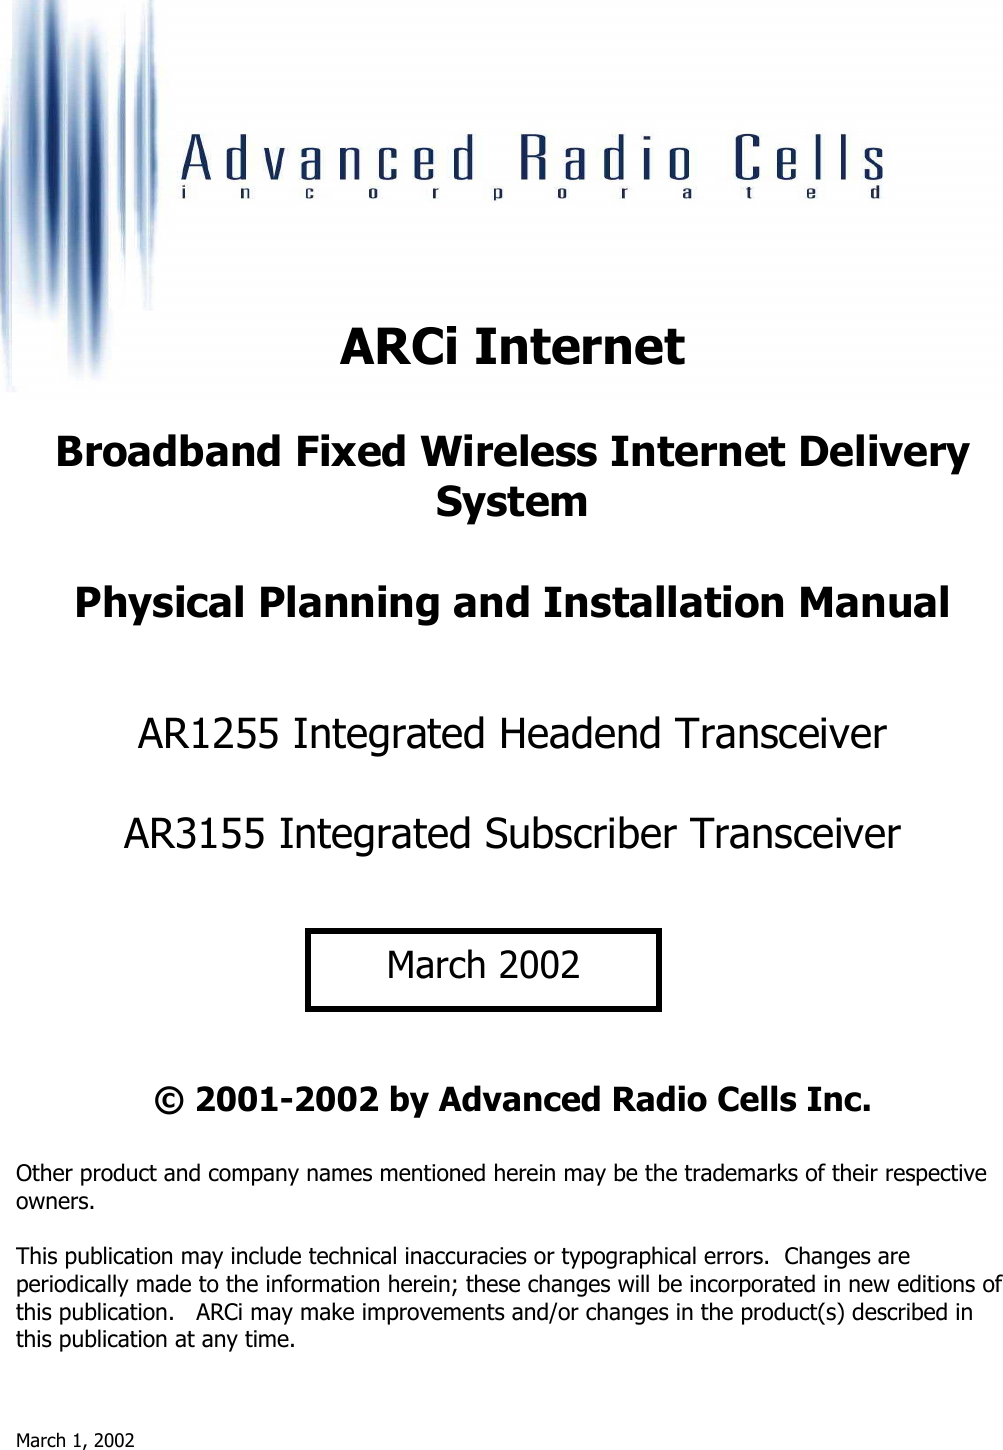 March 1, 2002       ARCi Internet  Broadband Fixed Wireless Internet Delivery System  Physical Planning and Installation Manual   AR1255 Integrated Headend Transceiver  AR3155 Integrated Subscriber Transceiver       © 2001-2002 by Advanced Radio Cells Inc.  Other product and company names mentioned herein may be the trademarks of their respective owners.  This publication may include technical inaccuracies or typographical errors.  Changes are periodically made to the information herein; these changes will be incorporated in new editions of this publication.   ARCi may make improvements and/or changes in the product(s) described in this publication at any time. March 2002